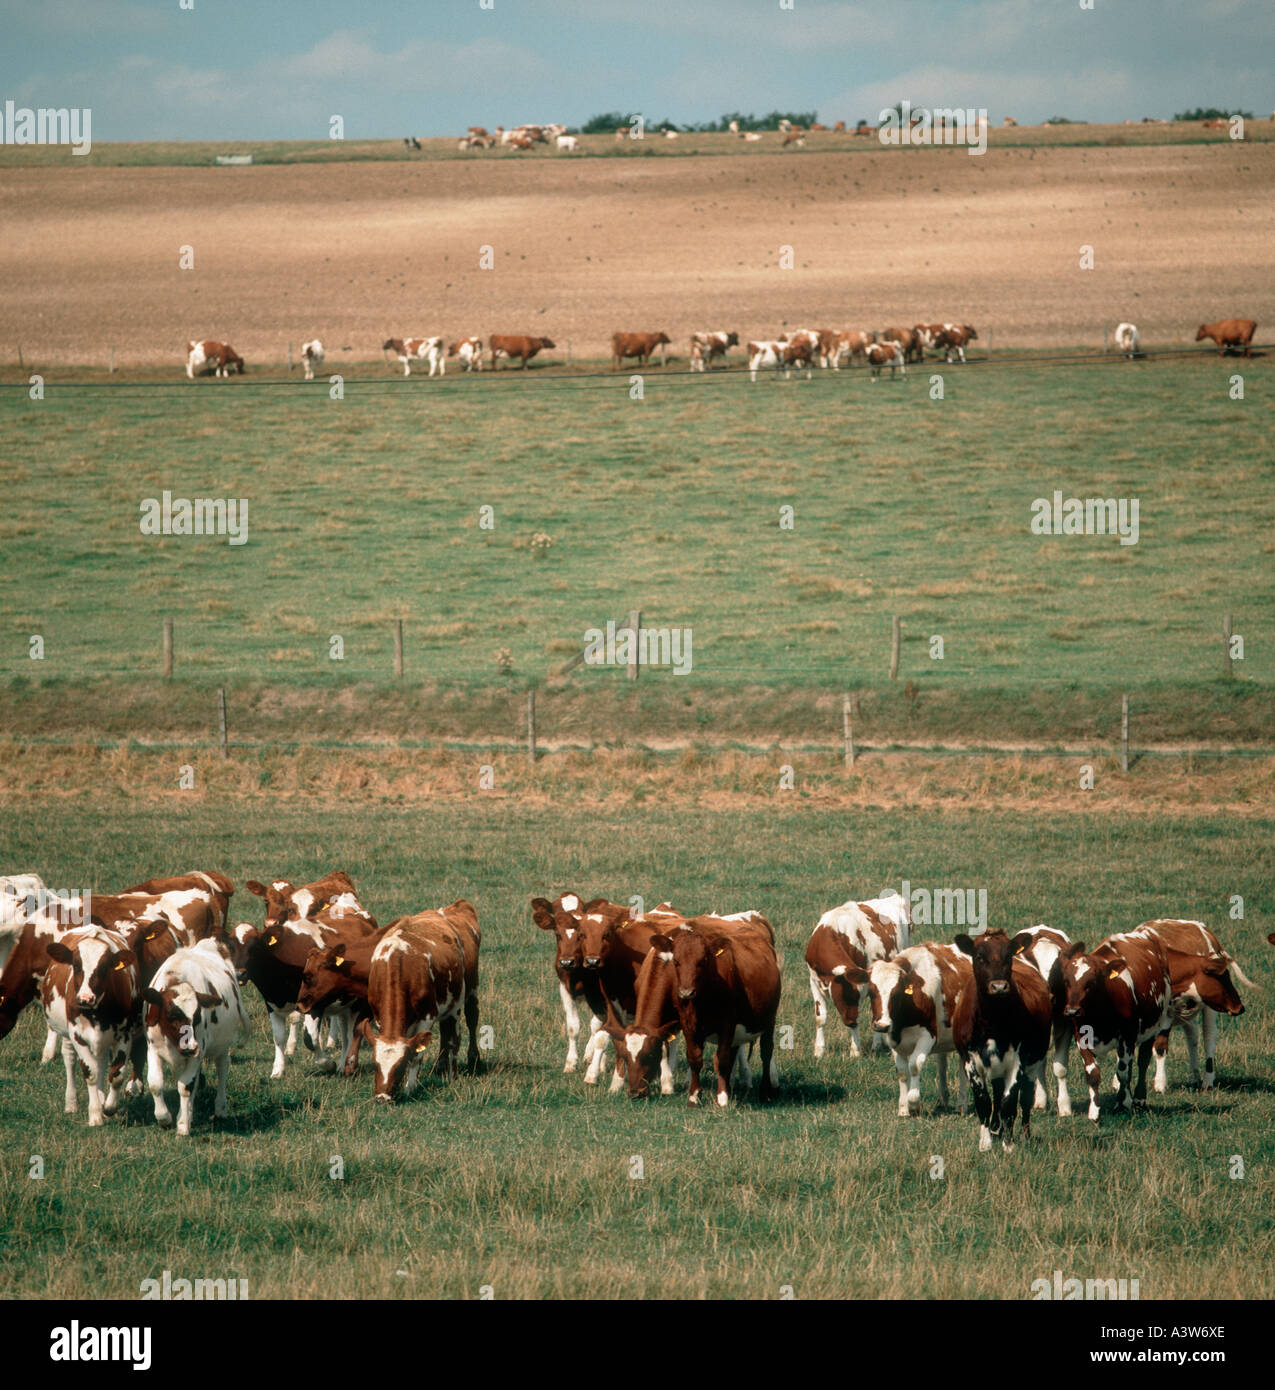 Ayrshire yearling cattle herds in divided fields Stock Photo